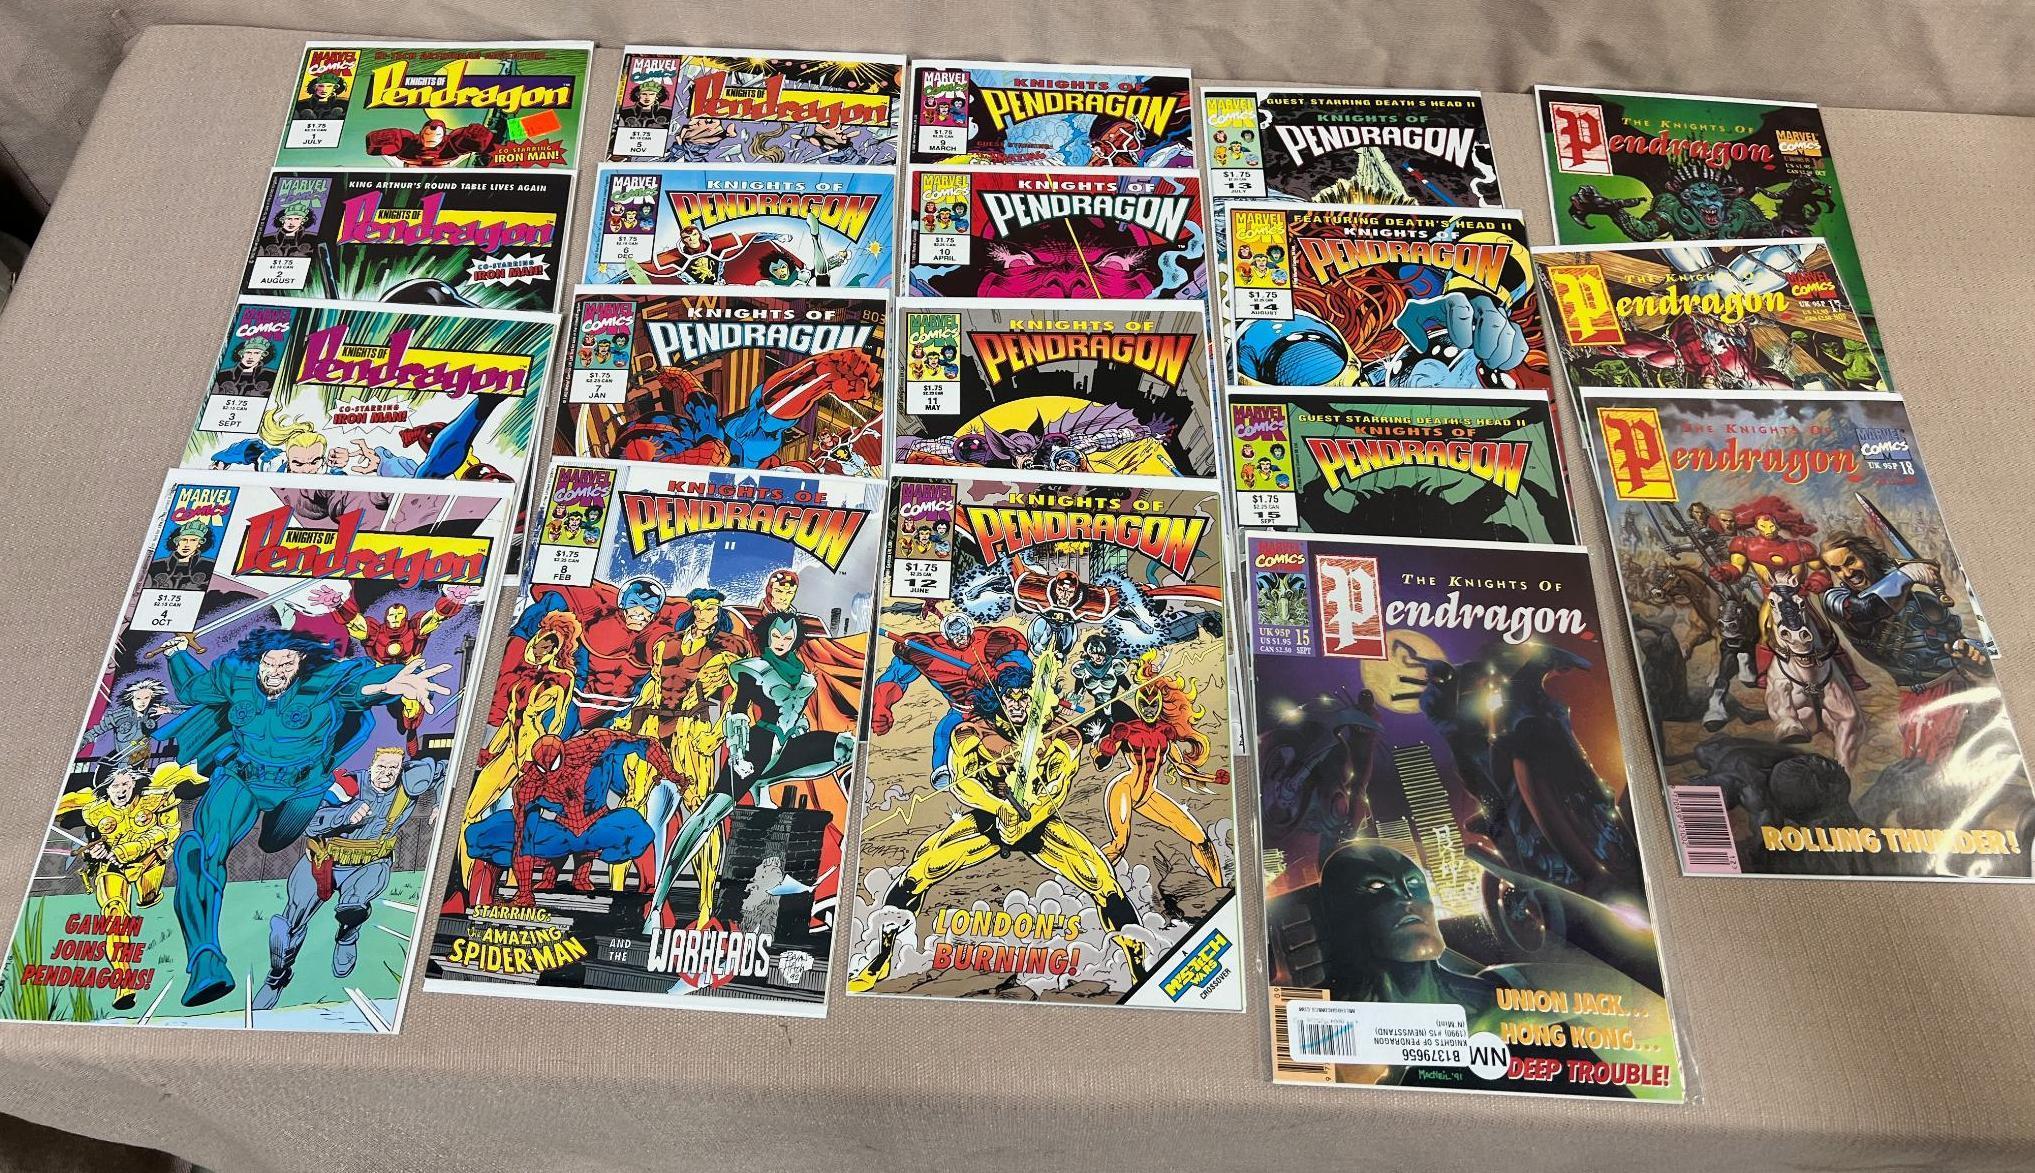 Marvel Knights of Pendragon Comic books, 1-18 plus others, see all pics